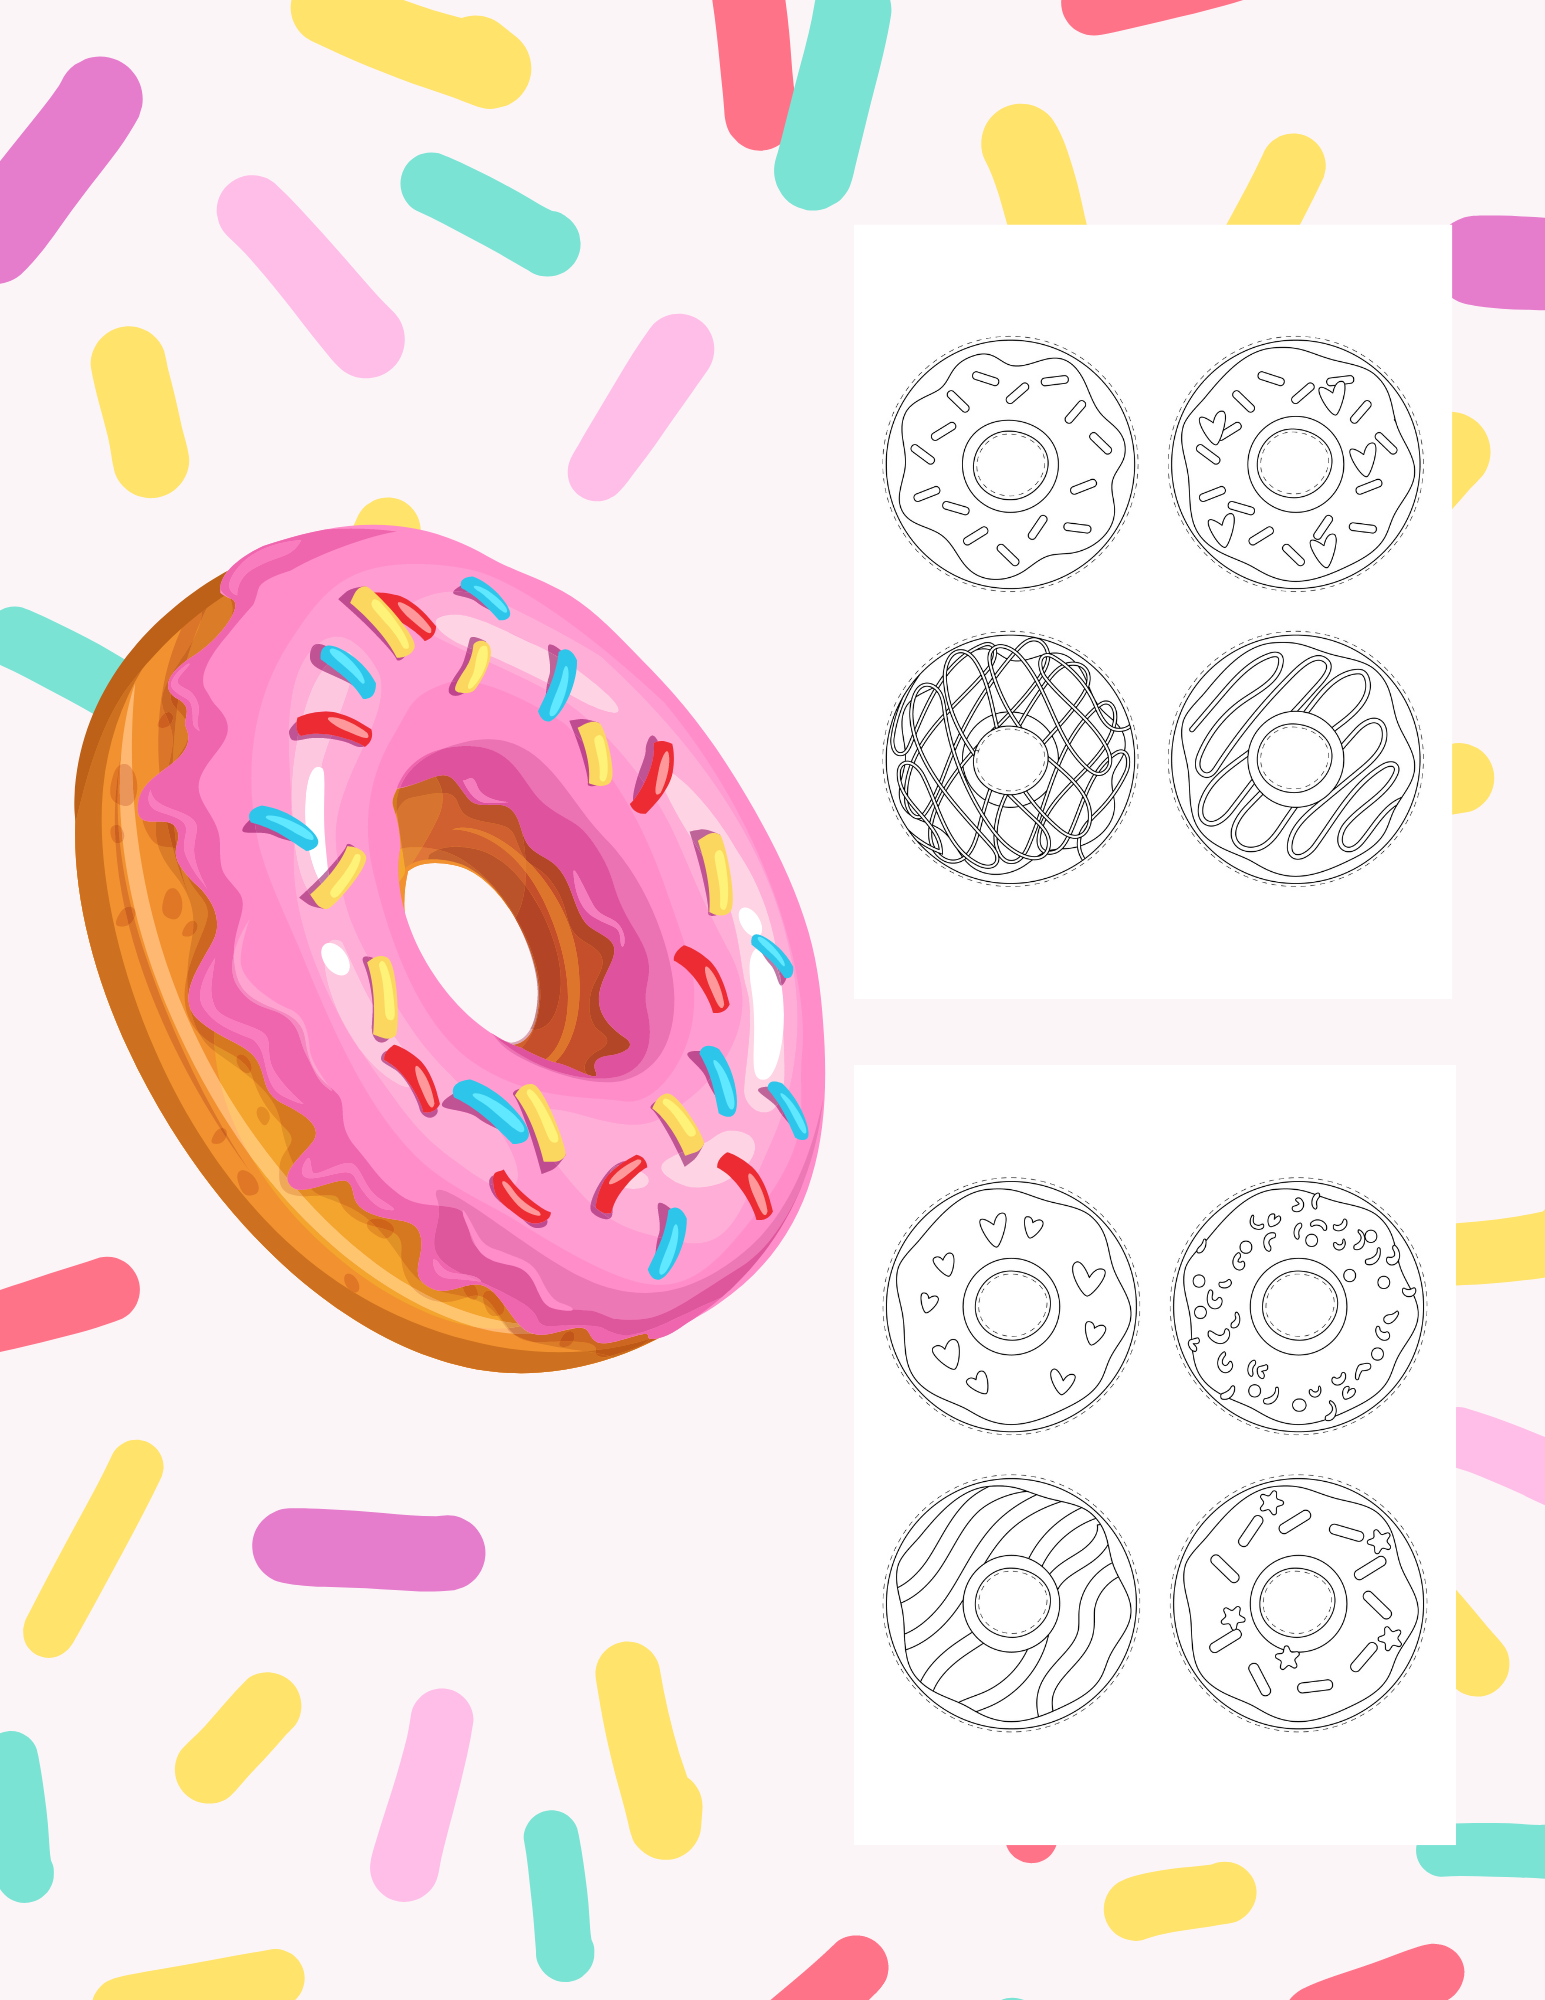 Fun and Delicious: 4 Donut Coloring Pages for Kids